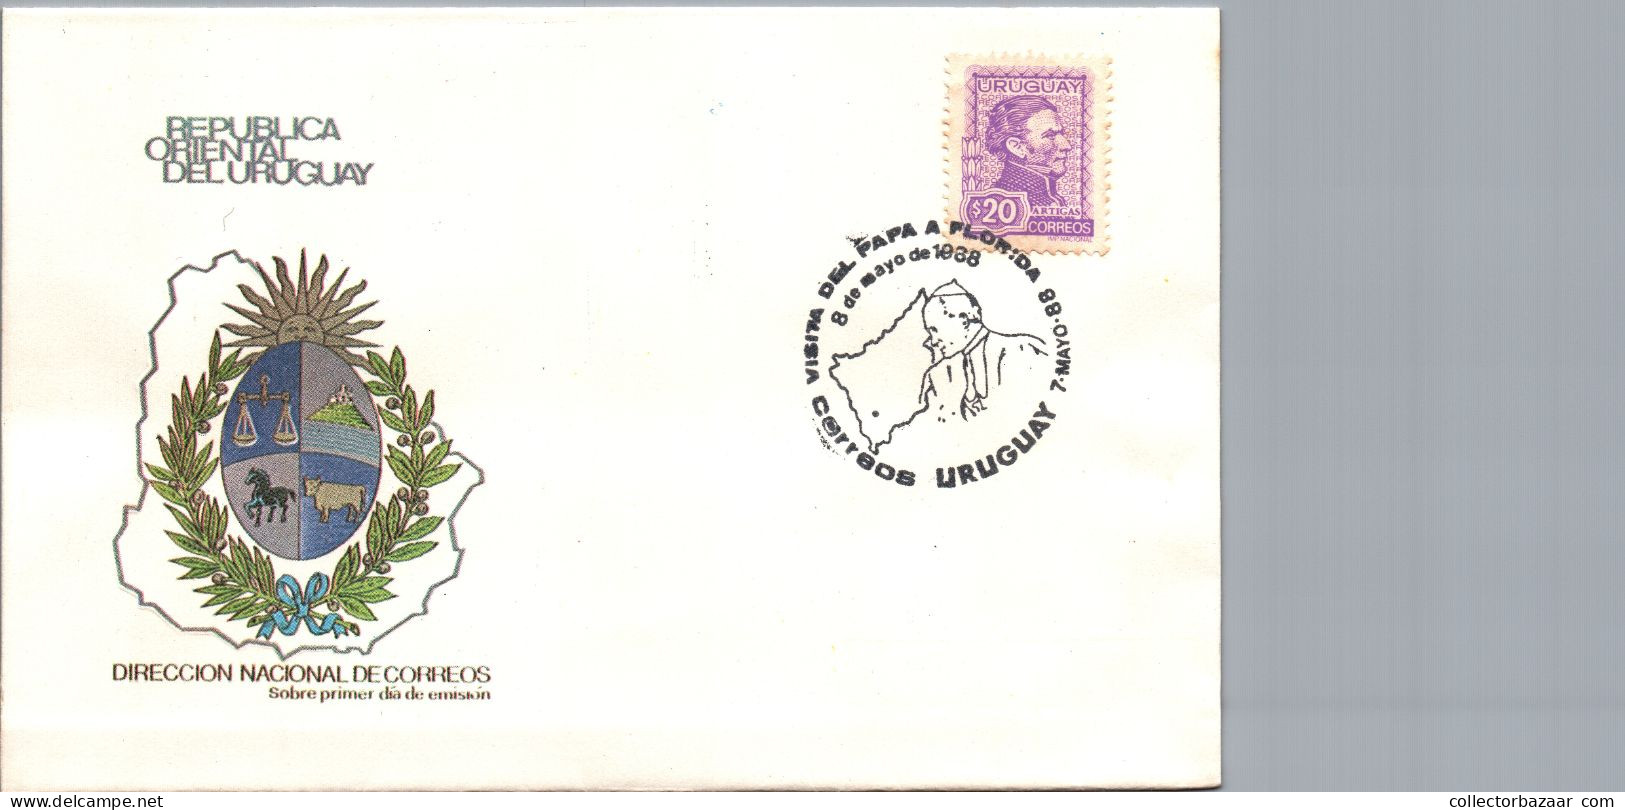 1987 John Paul II the complete lot of FDC & special cancel for visit to Uruguay 5 covers